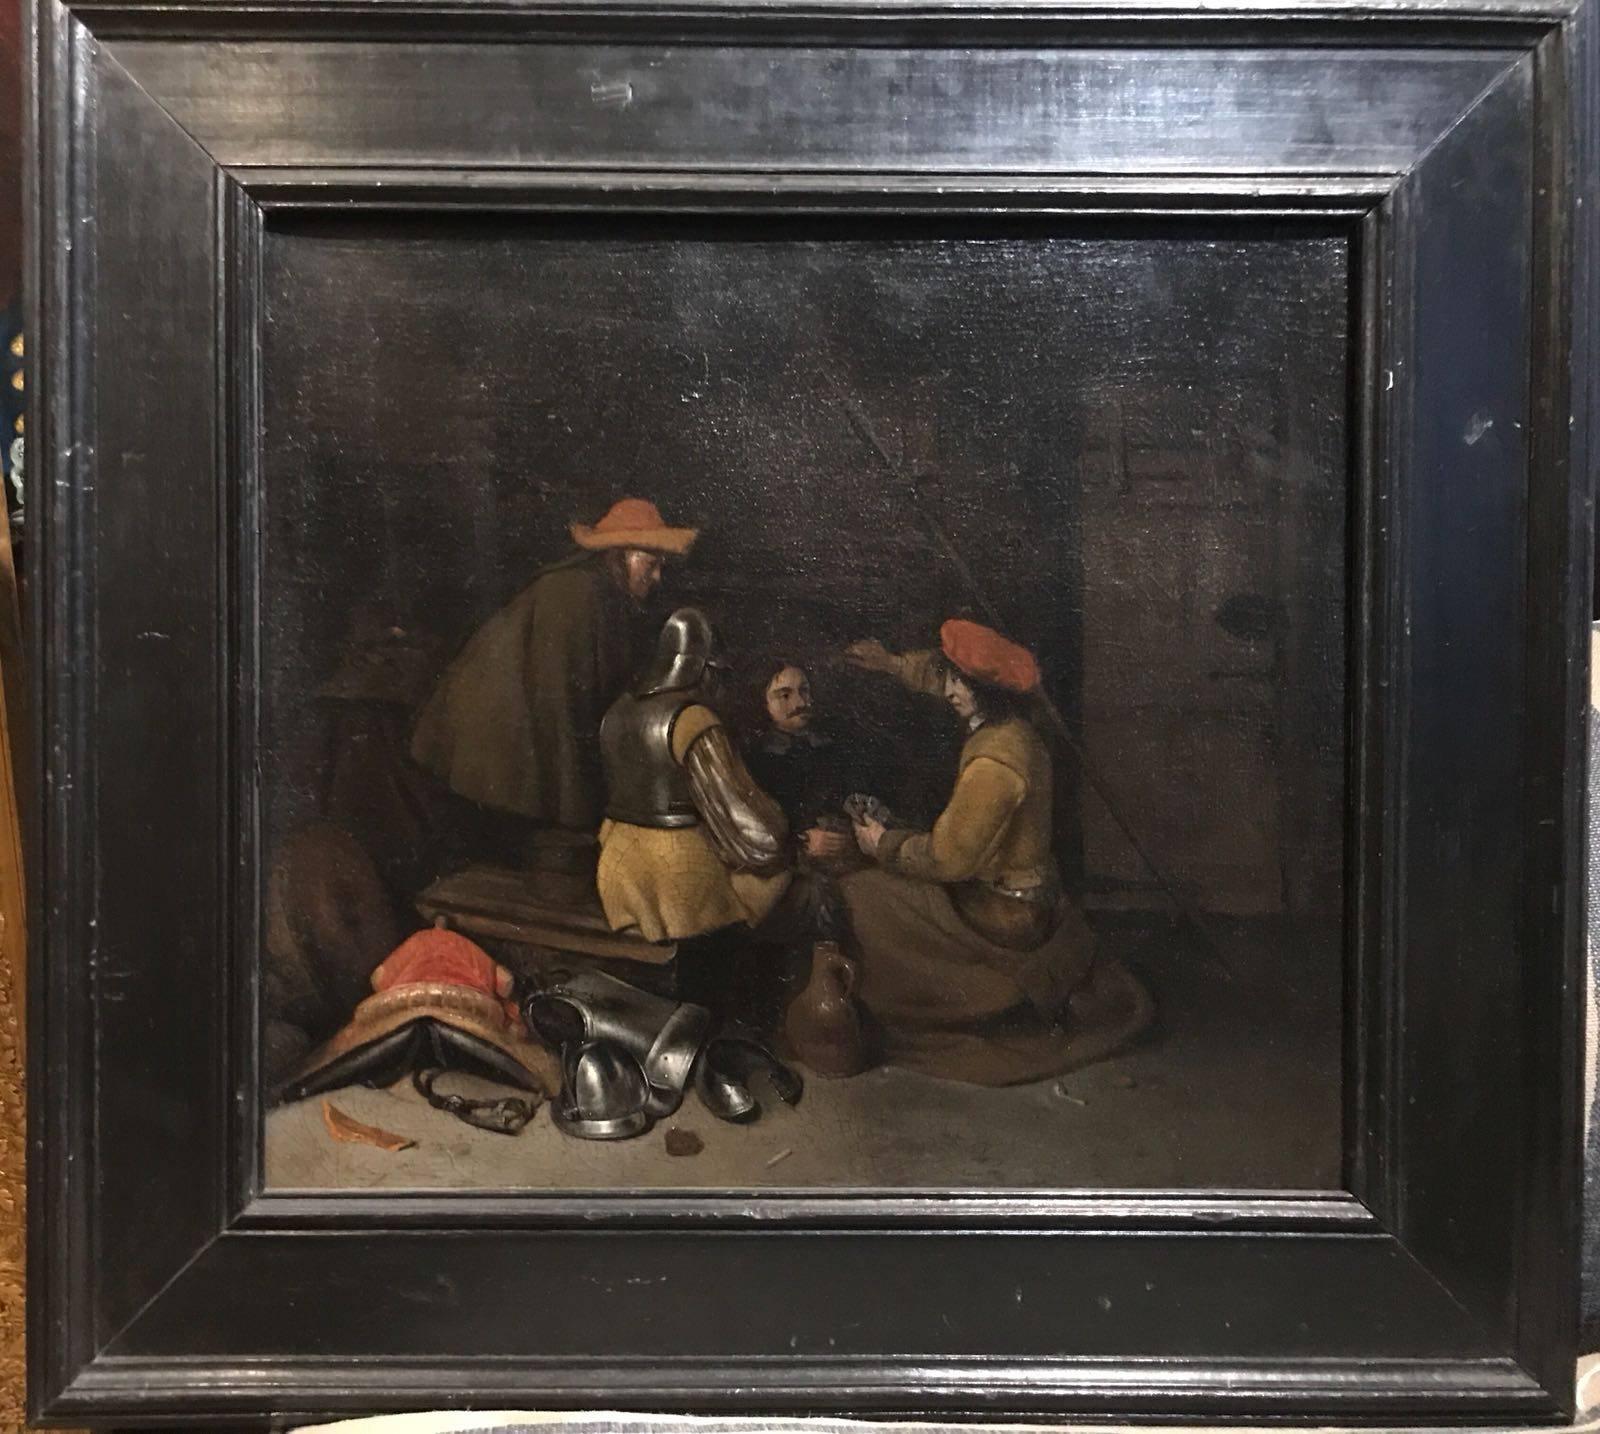 Dutch 17th Century Oil Painting - The Card Game by Ter Borch